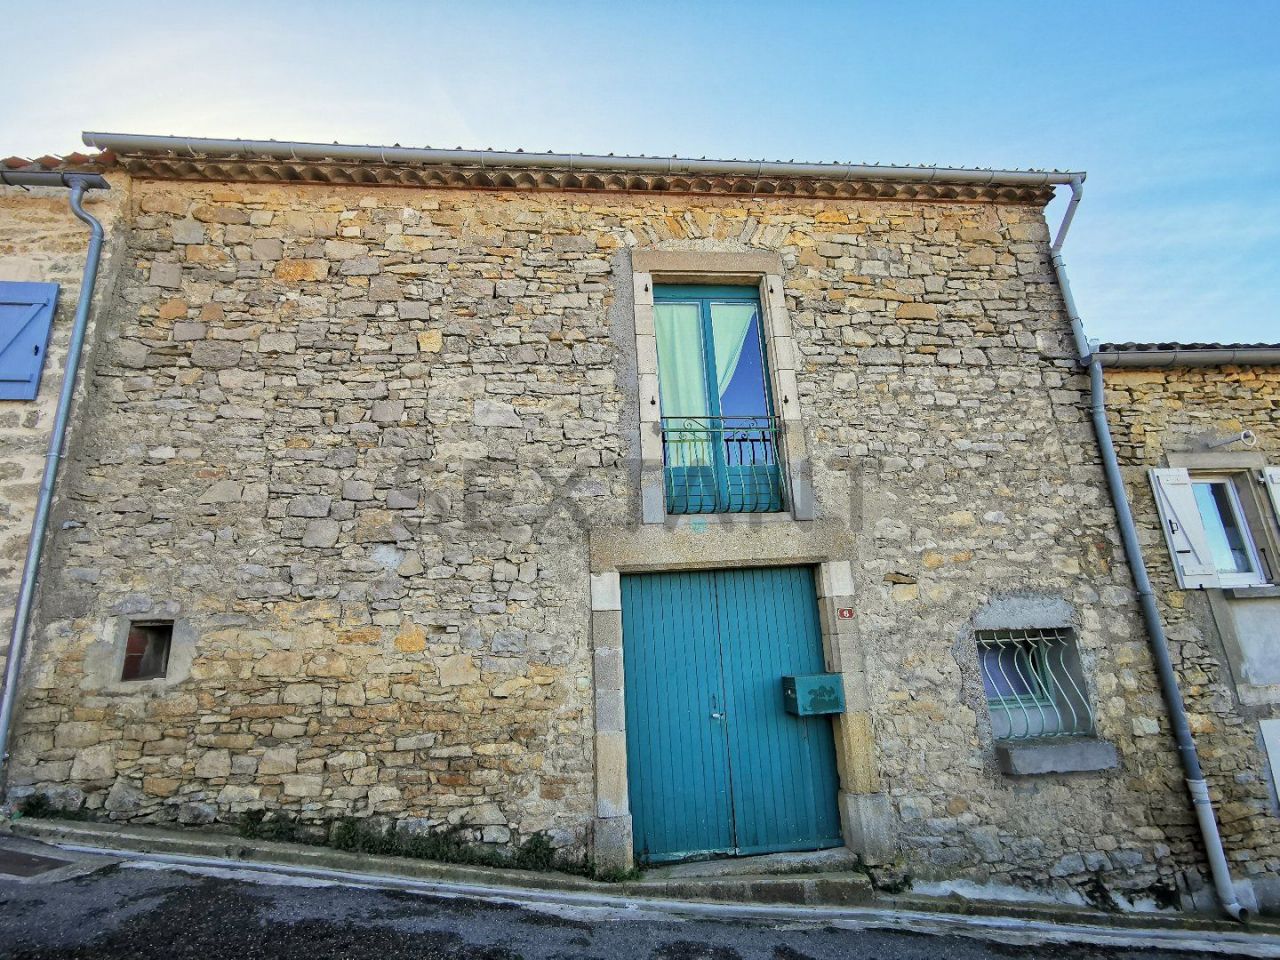 House in Carcassonne, France - picture 1